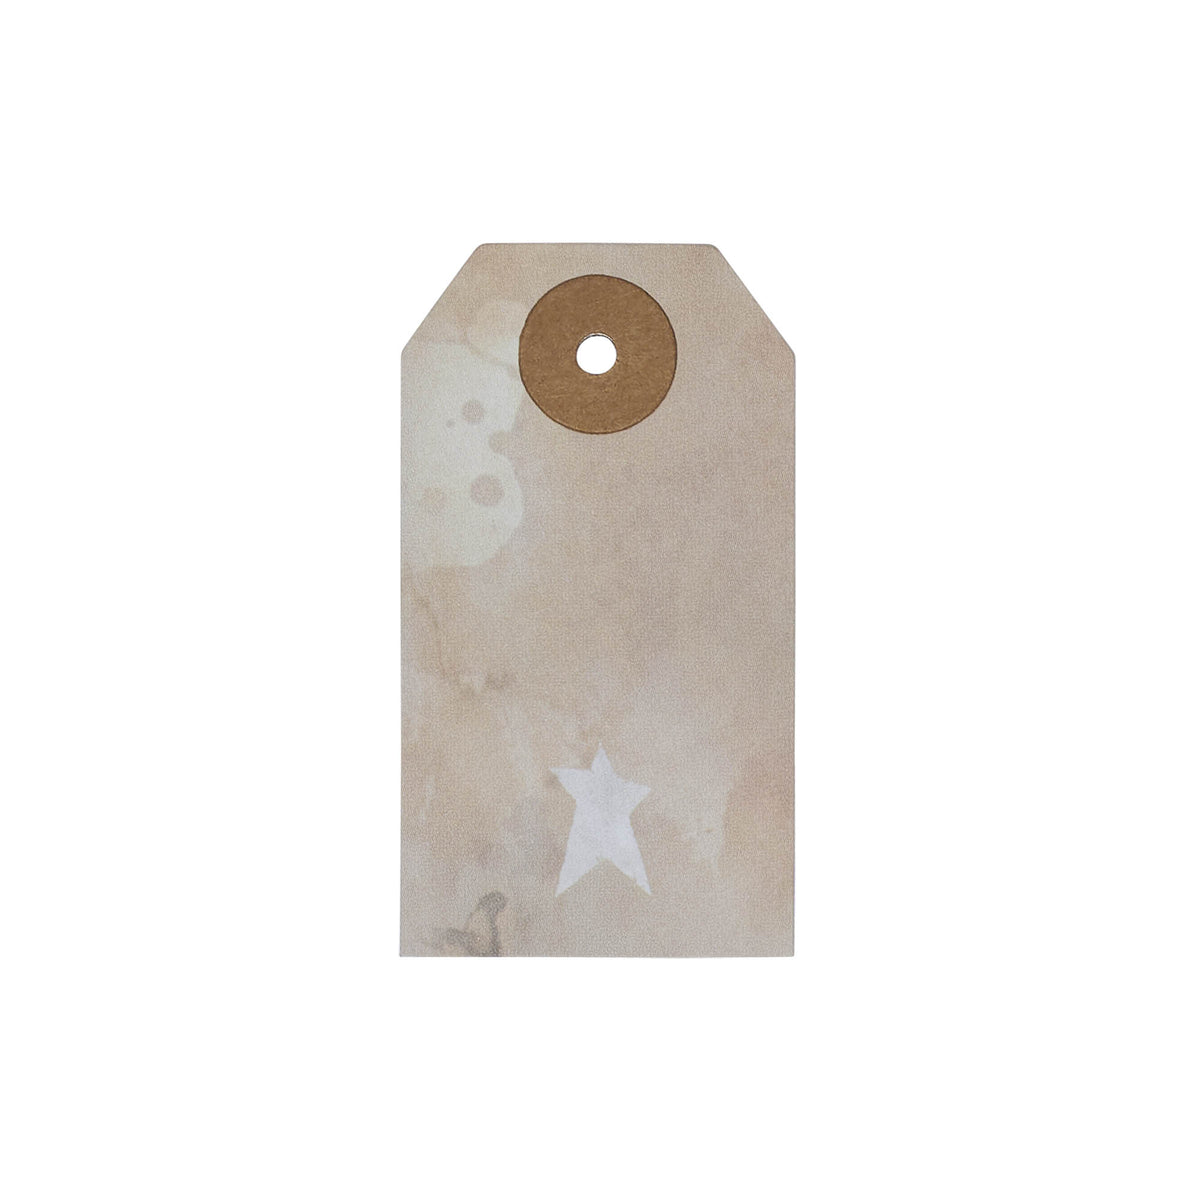 Primitive Star Tea Stained Paper Tag Creme 2.75x1.5 w/ Twine Set of 50